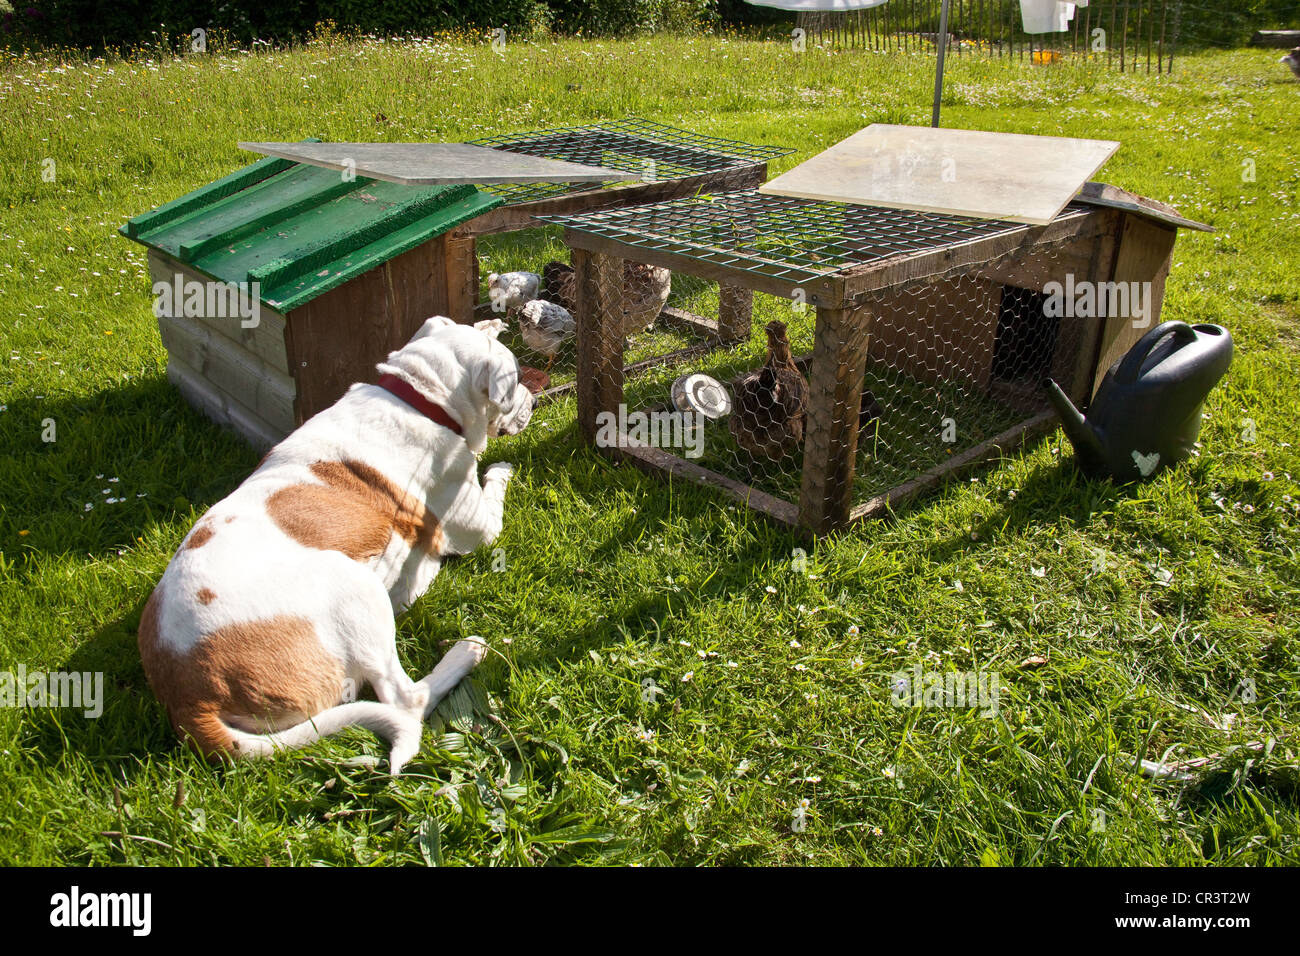 Large farm dog watching over baby chicken chicks, Hampshire, England. Stock Photo